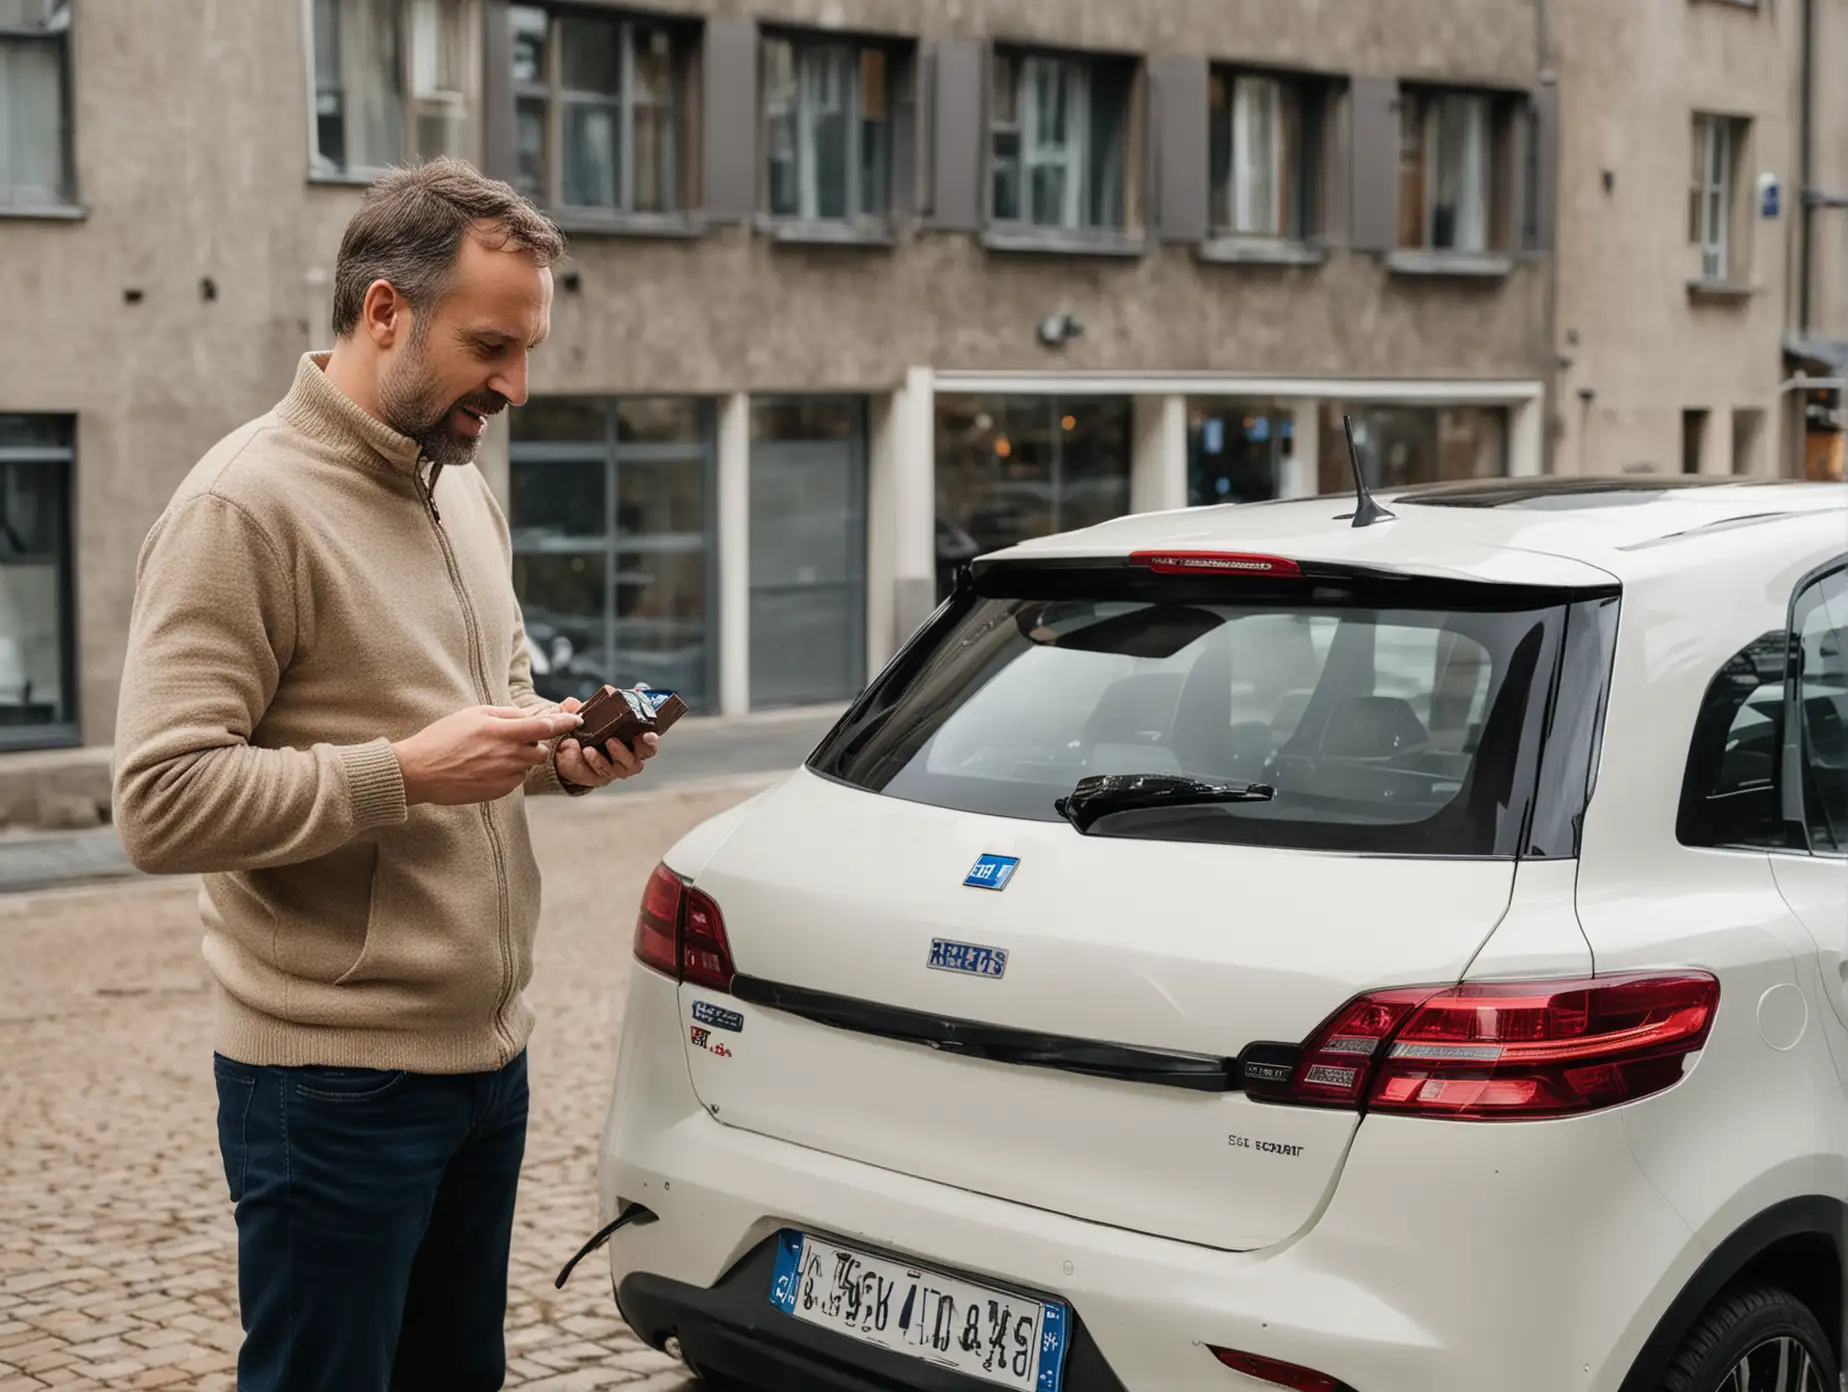 A 45 year old man standing in front of an electric car while it's charging. He is eating a square piece of Ritter Sport chocolate.